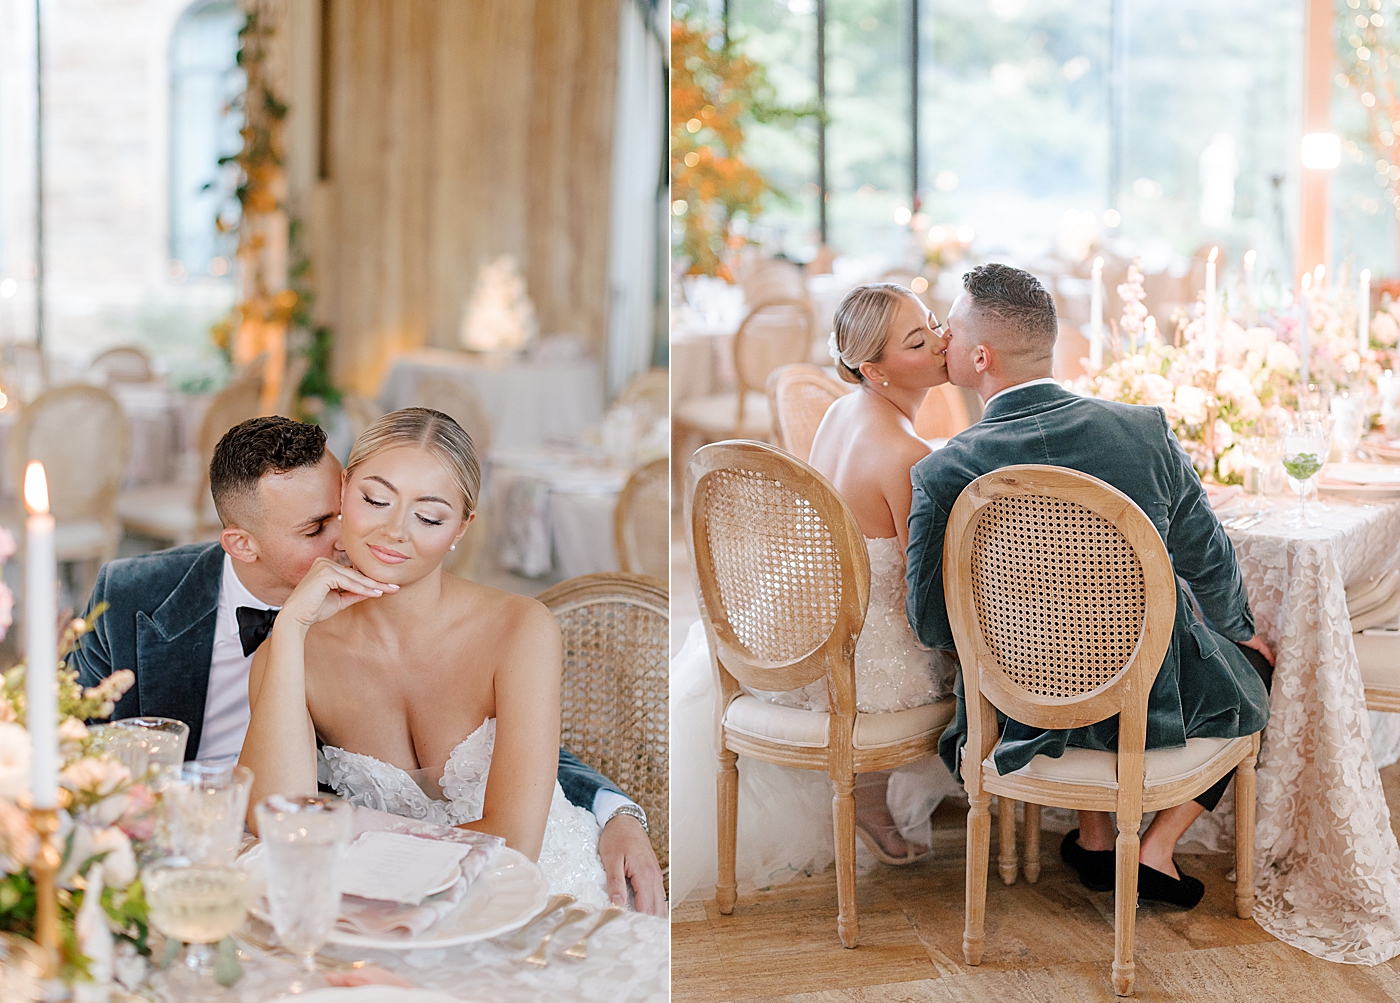 Bride and groom during their reception | Image by Hope Helmuth Photography